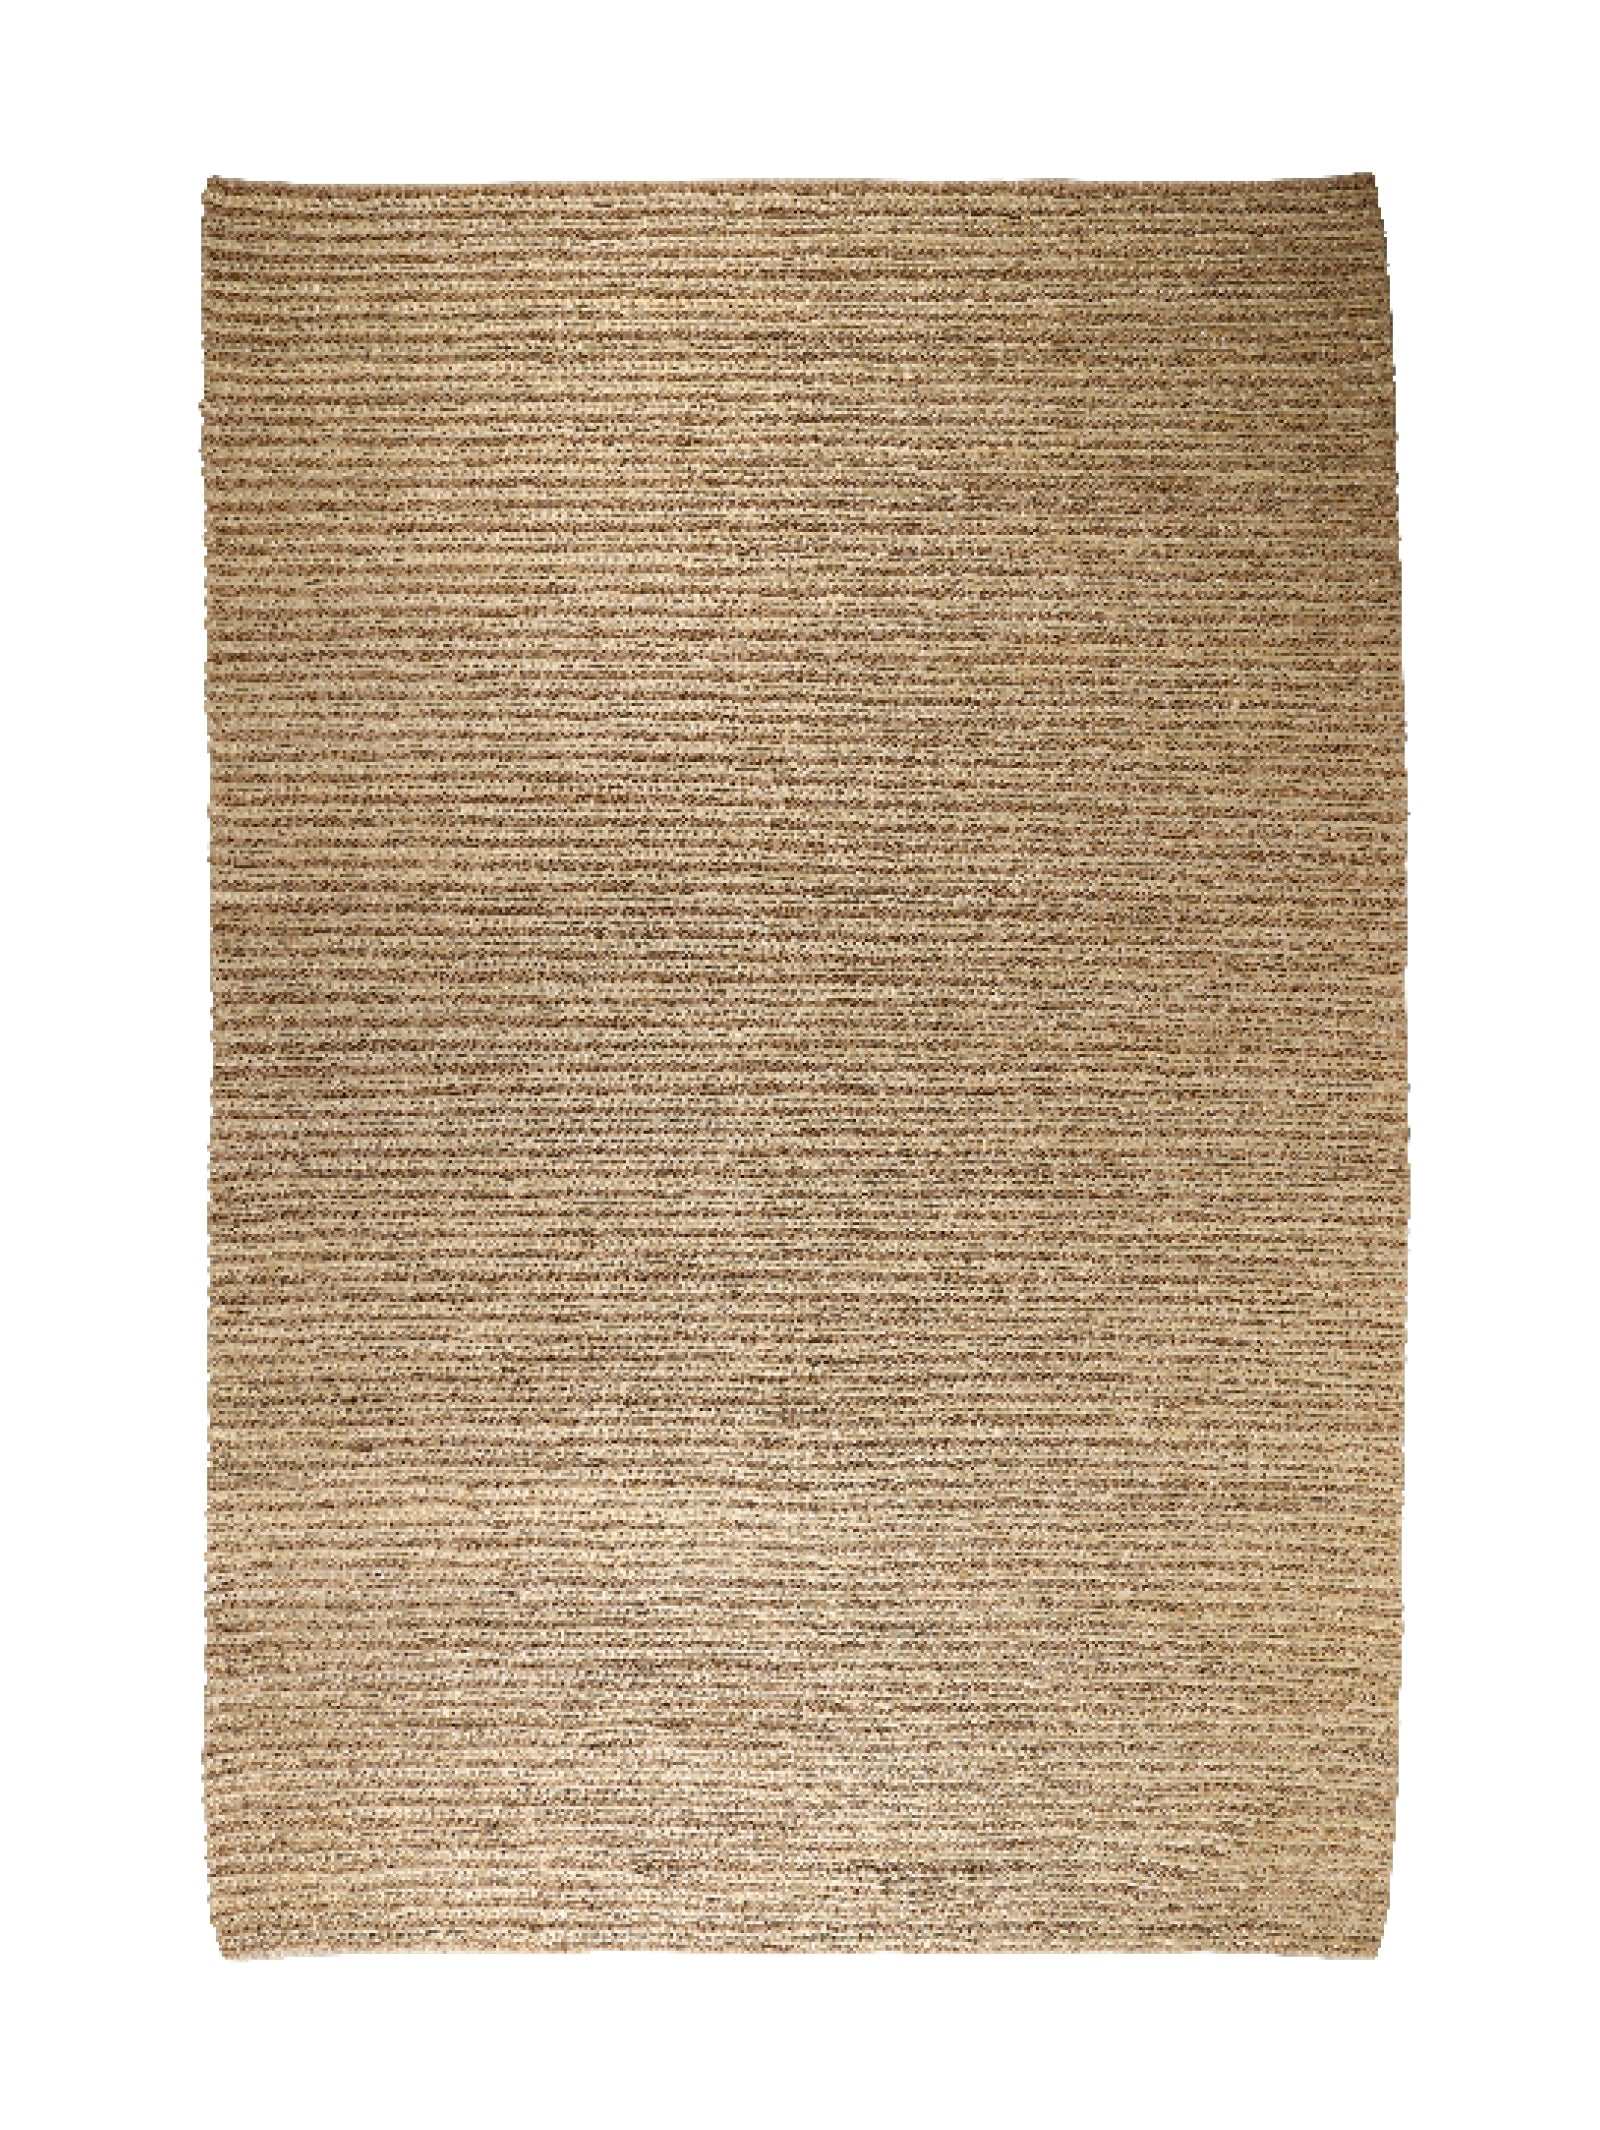 Bungalo Rug in Natural